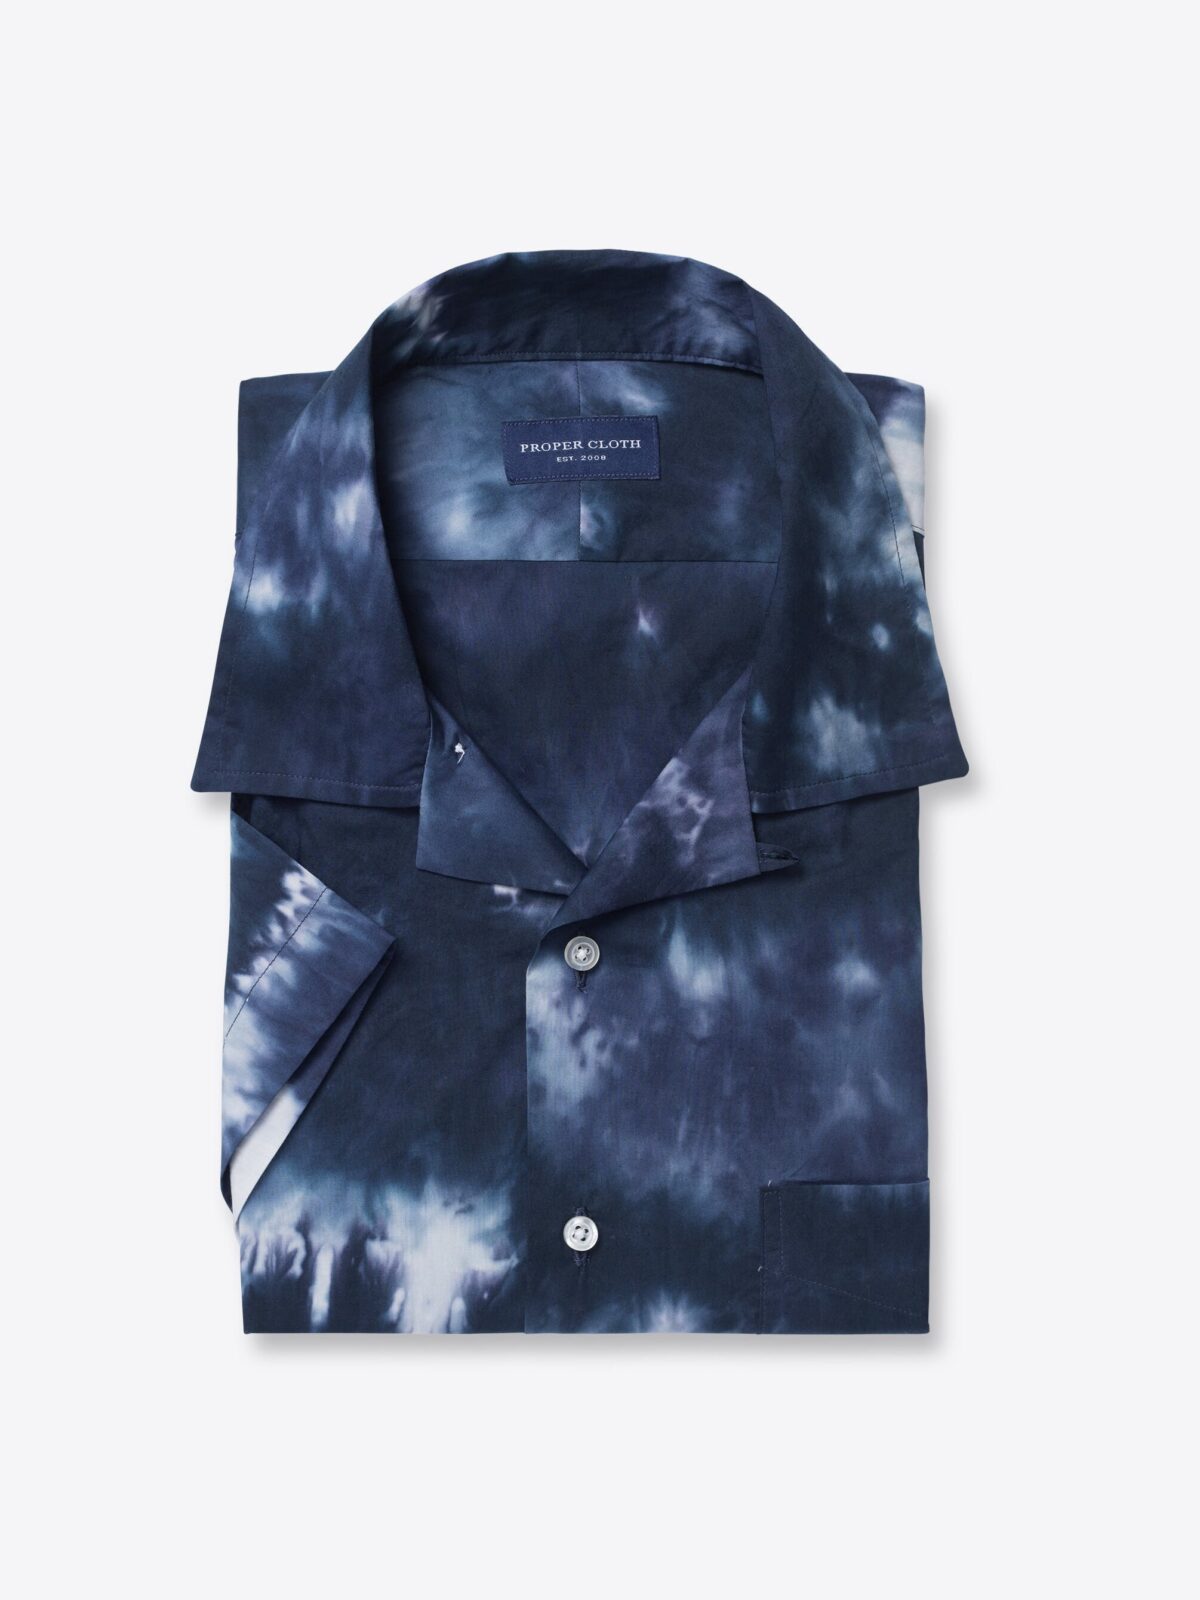 Japanese Navy and Light Blue Tie Dye Shirt by Proper Cloth